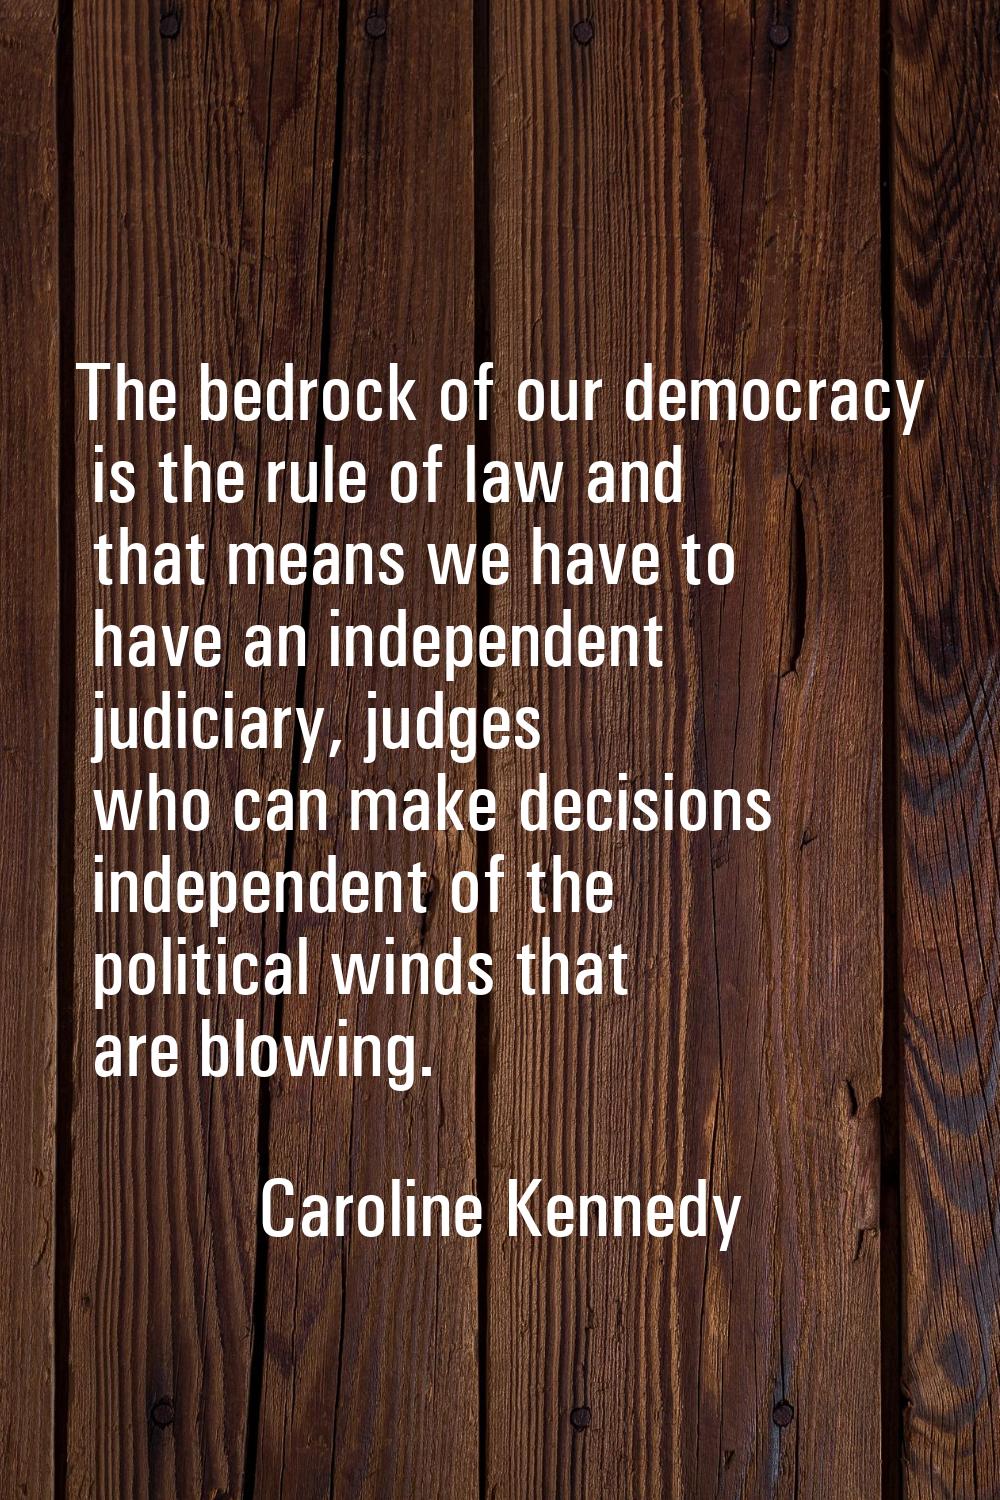 The bedrock of our democracy is the rule of law and that means we have to have an independent judic